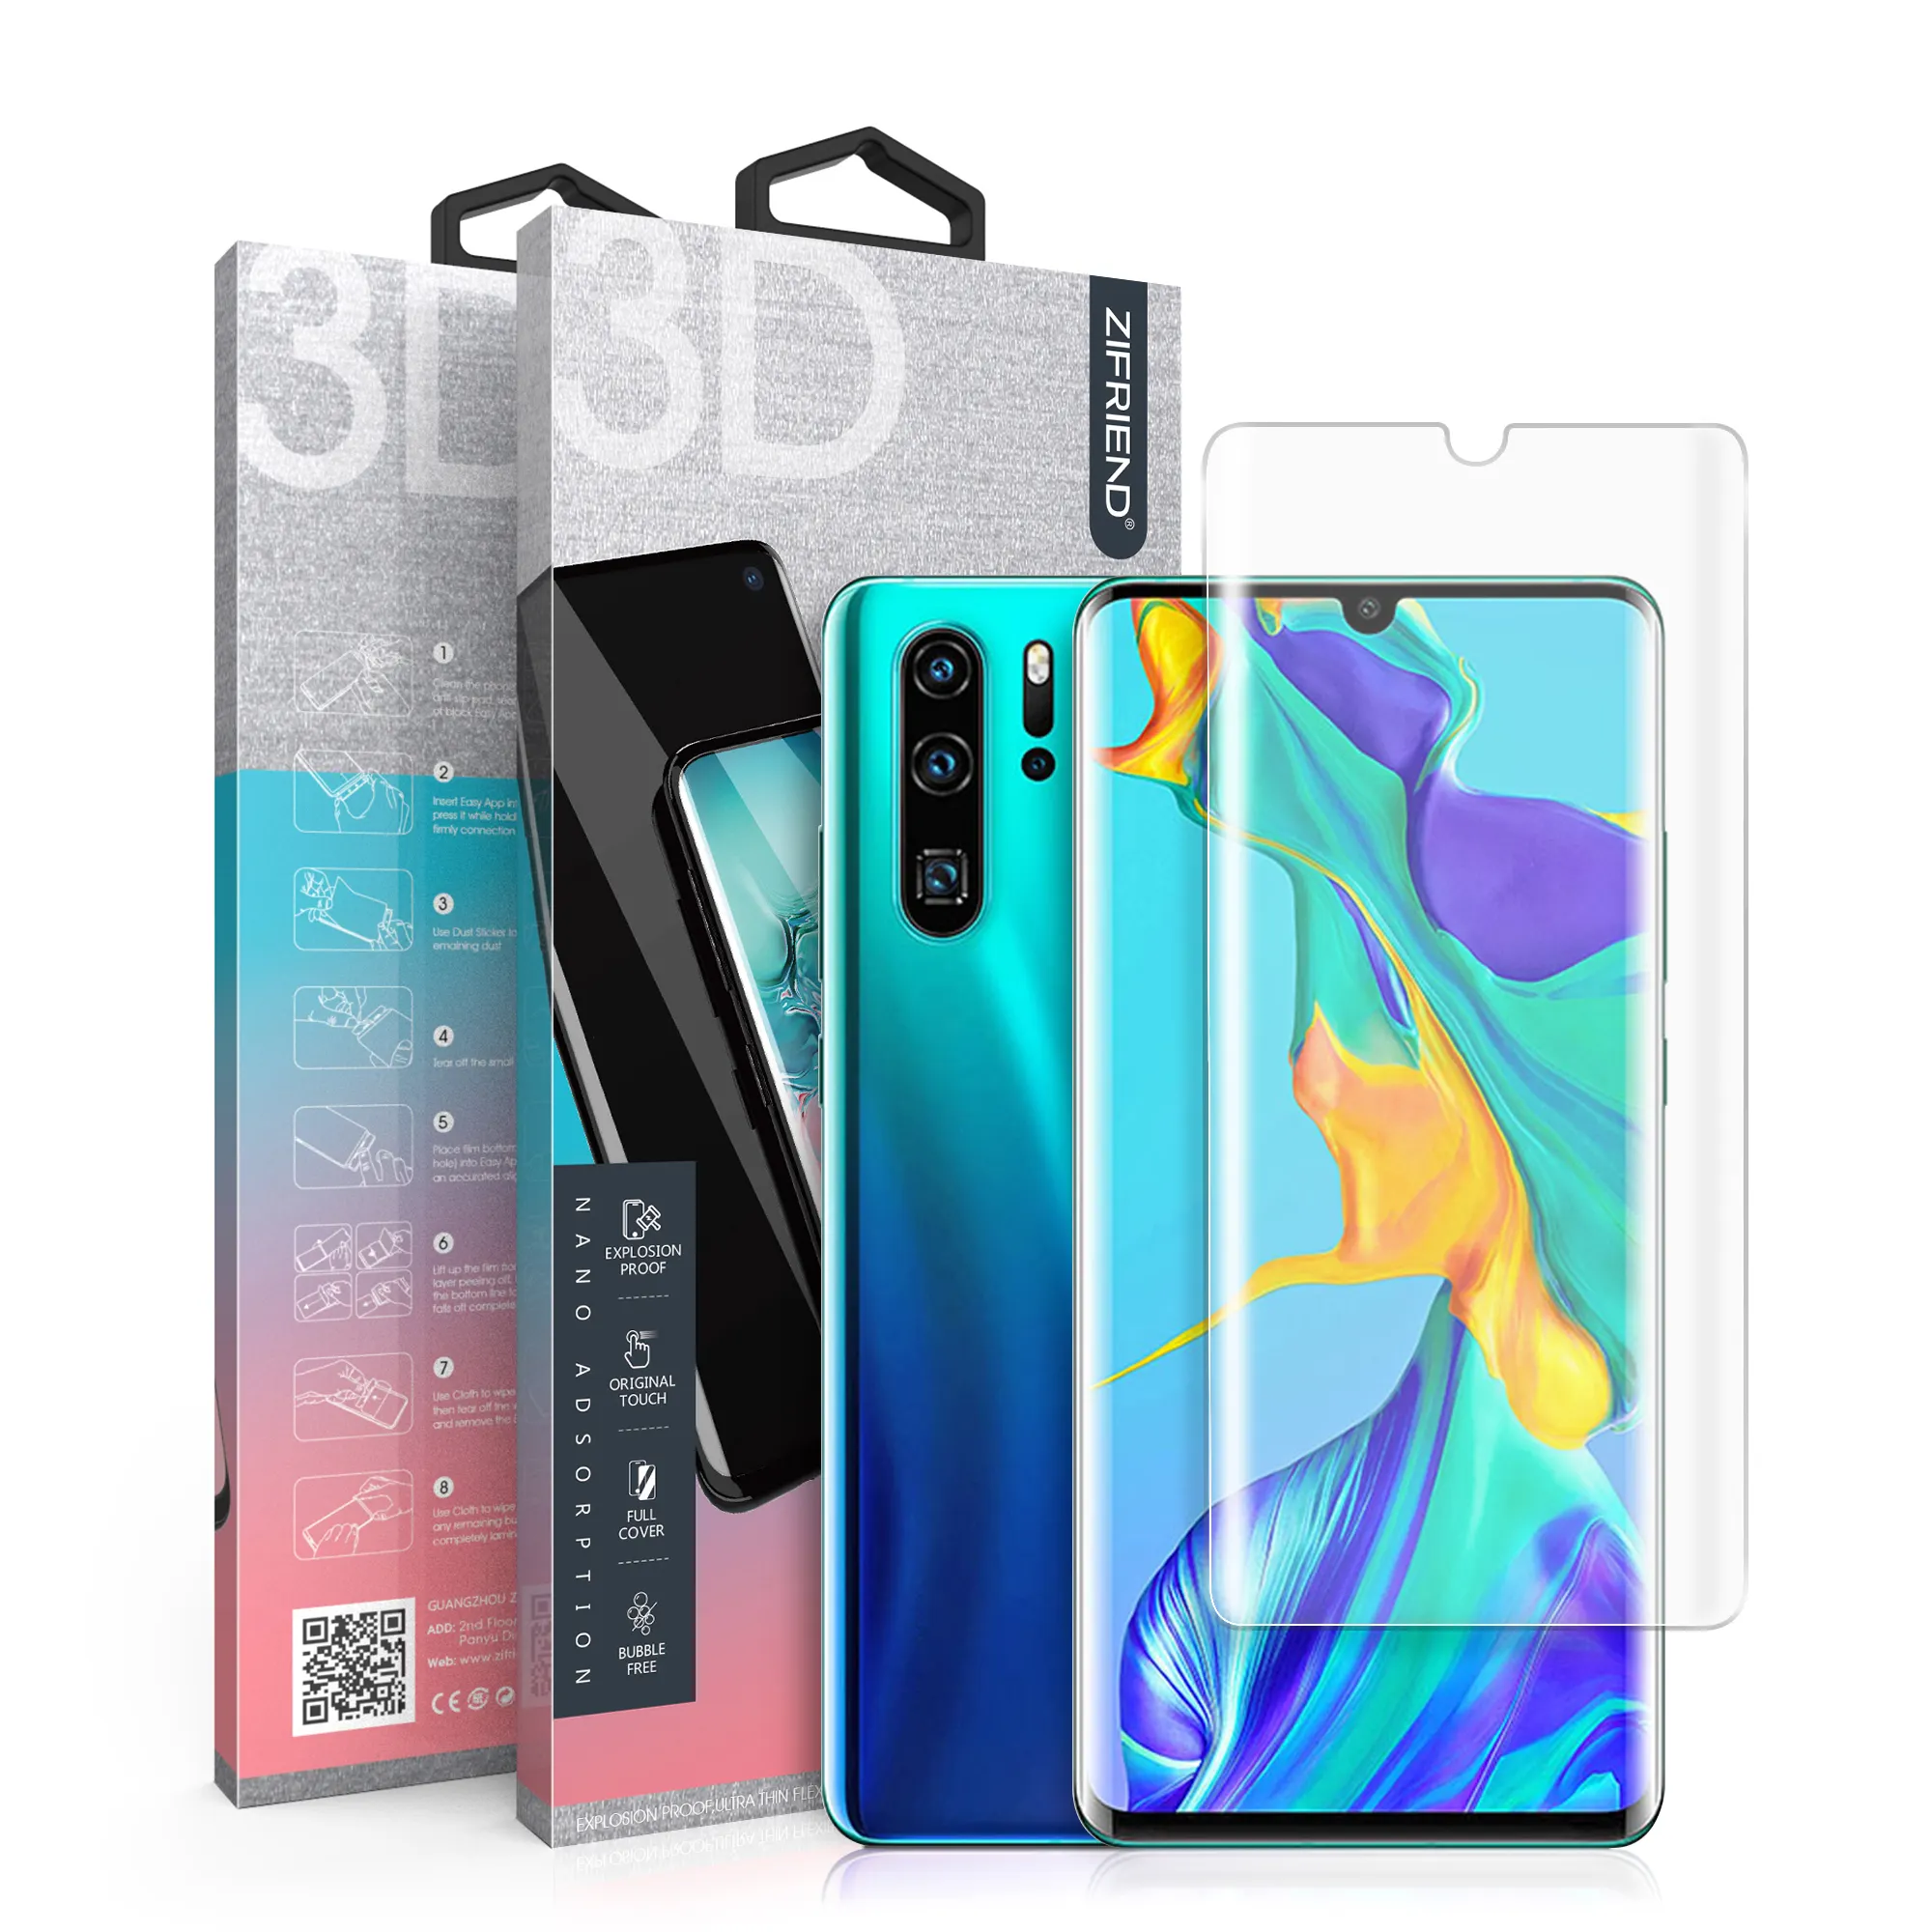 free_sample mobile tempered glass for huawei nova 5t infinix note 7 oneplus nord redmi note 8 pro Screen Protector